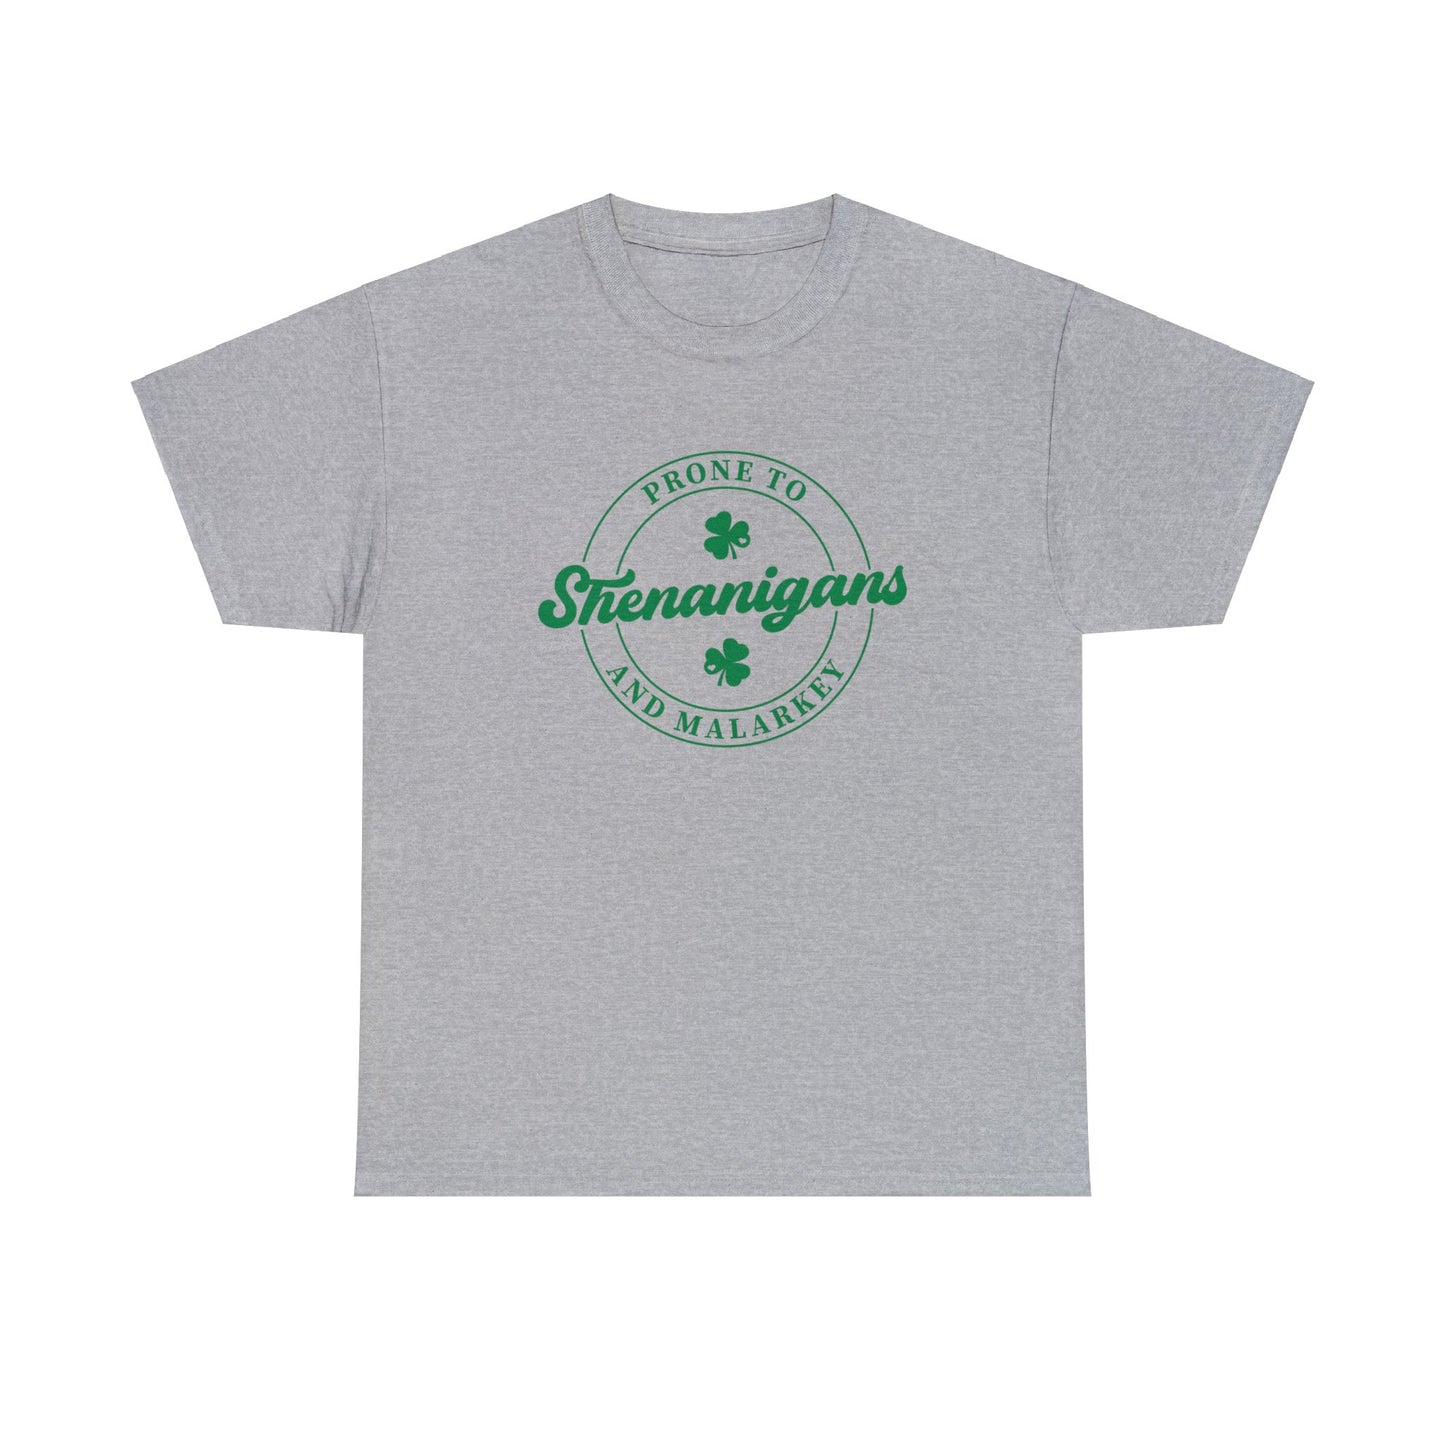 Shenanigans T-Shirt For St. Paddy's Day T Shirt For Malarky TShirt For St. Patrick's Day Tee